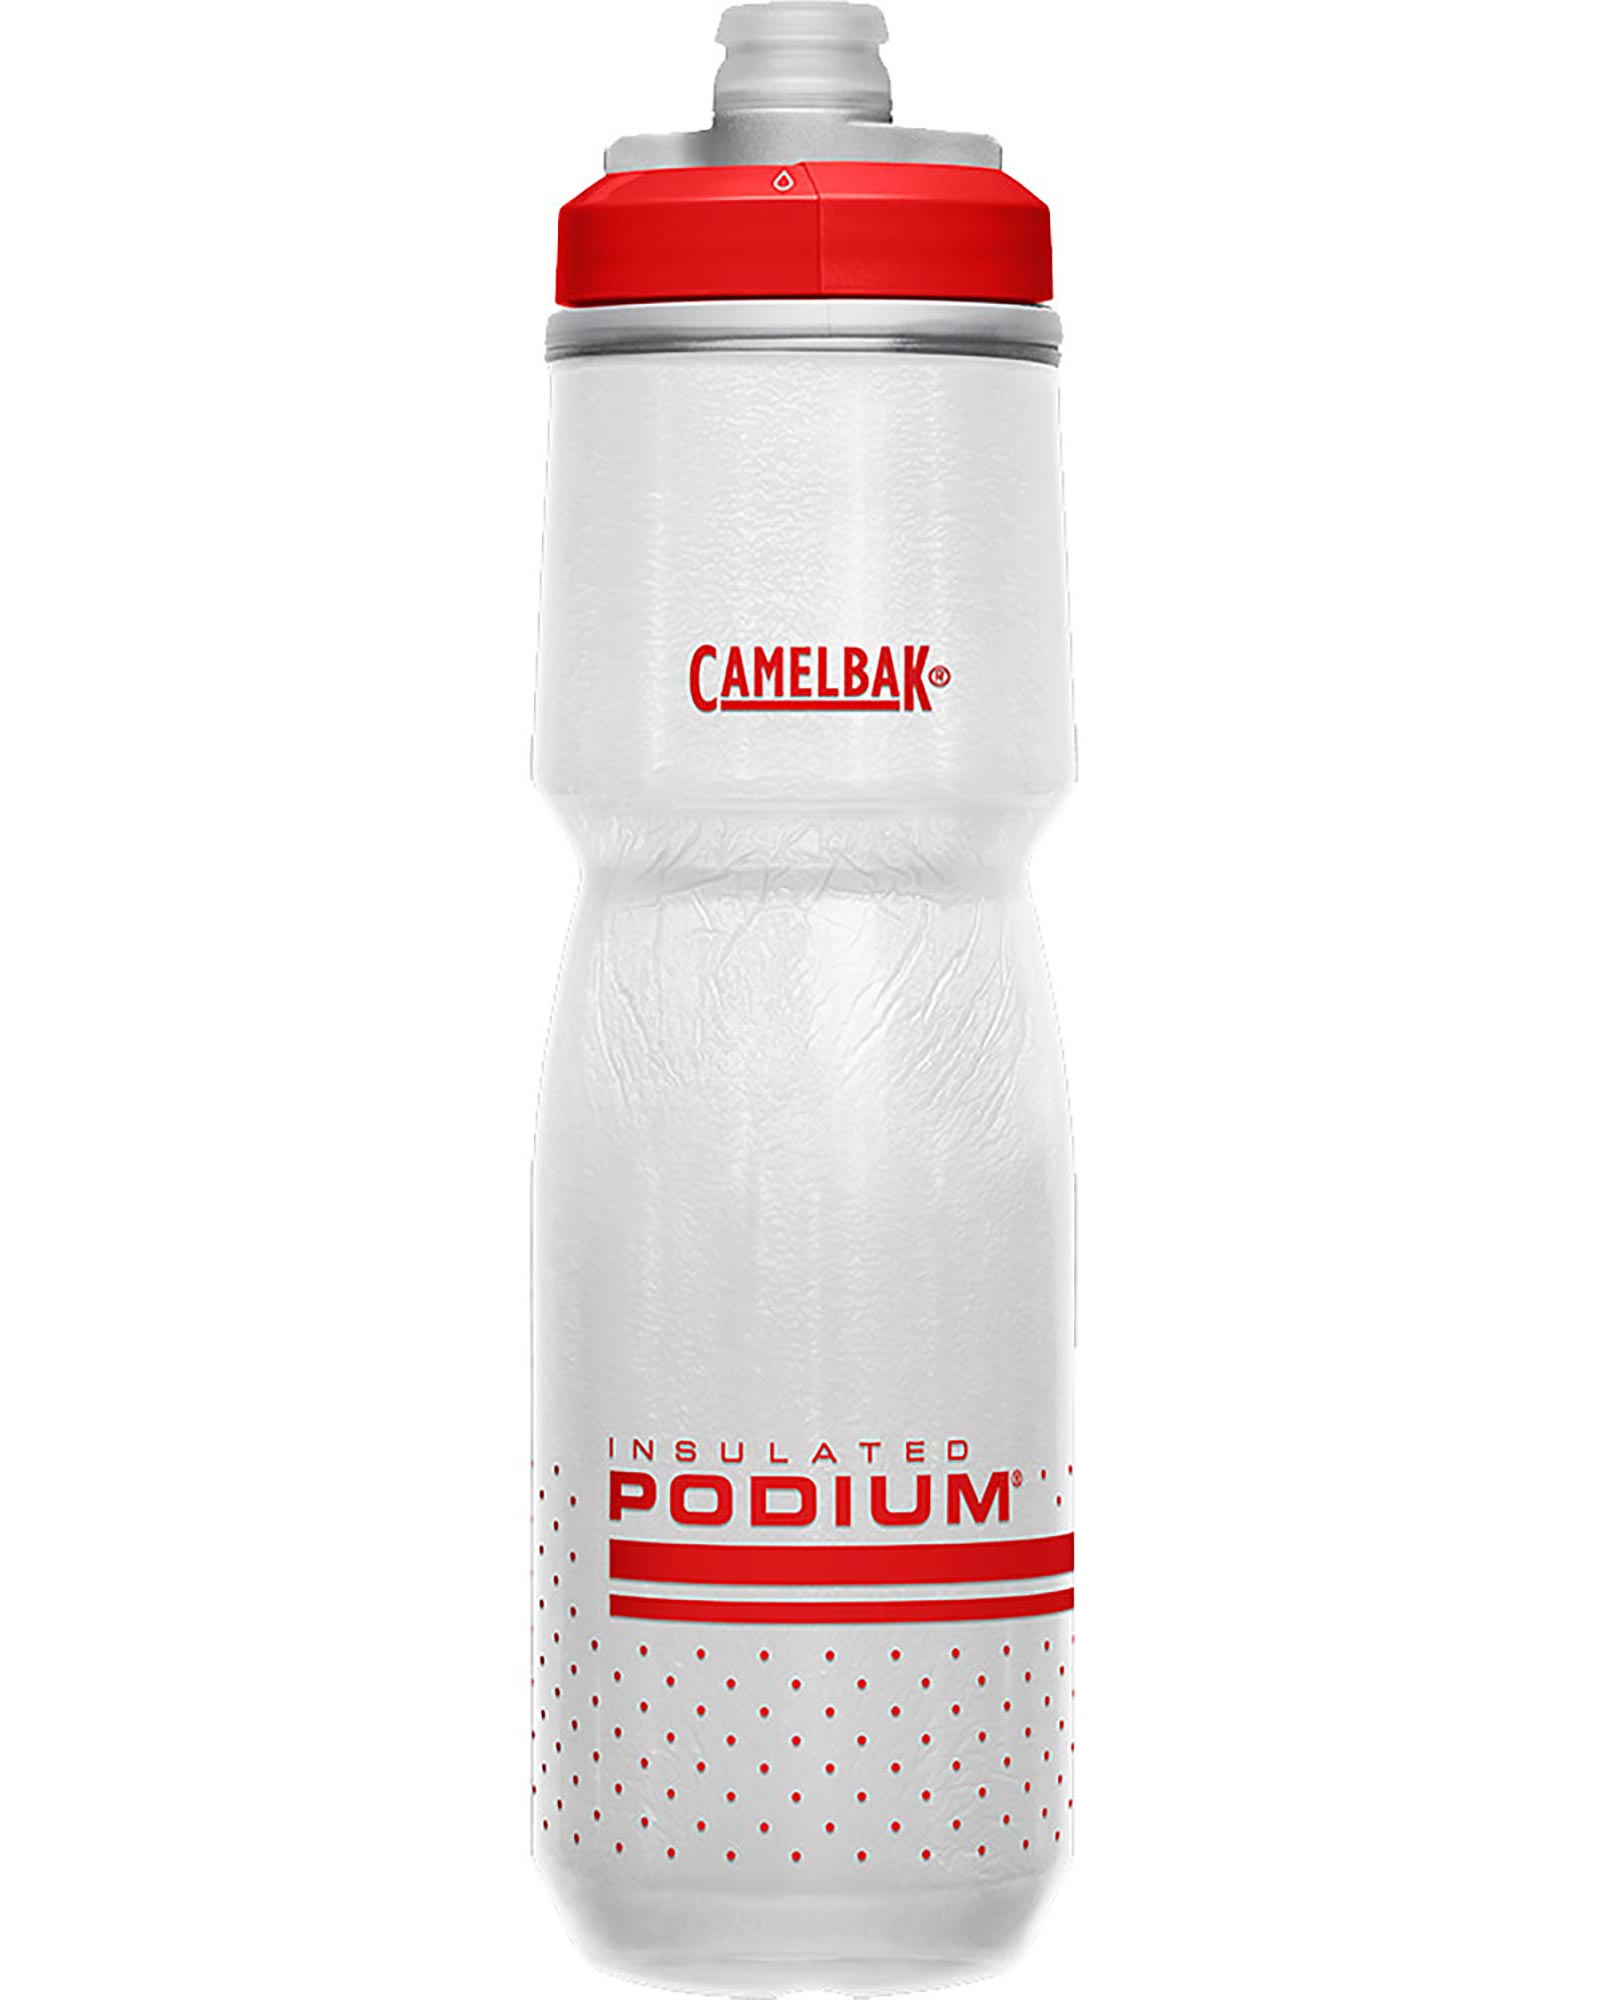 CamelBak Podium Chill 710ml Insulated Water Bottle - Fiery Red/White